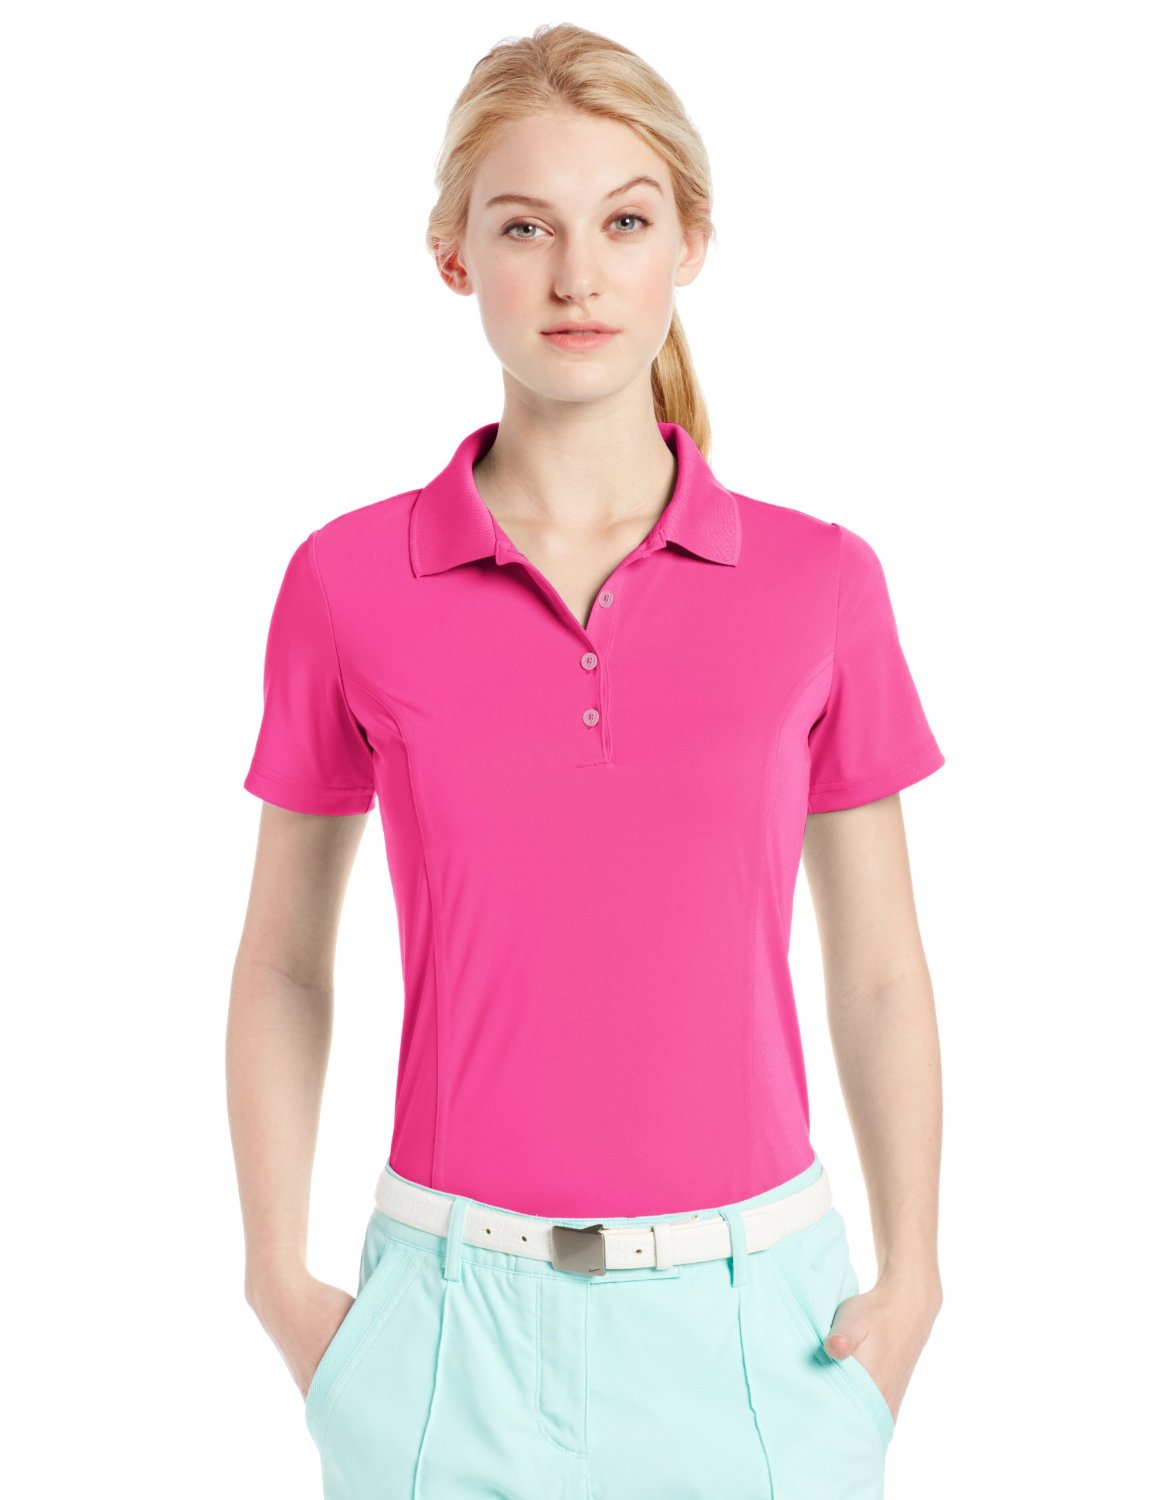 Adidas Womens Puremotion Solid Jersey Polo Shirts